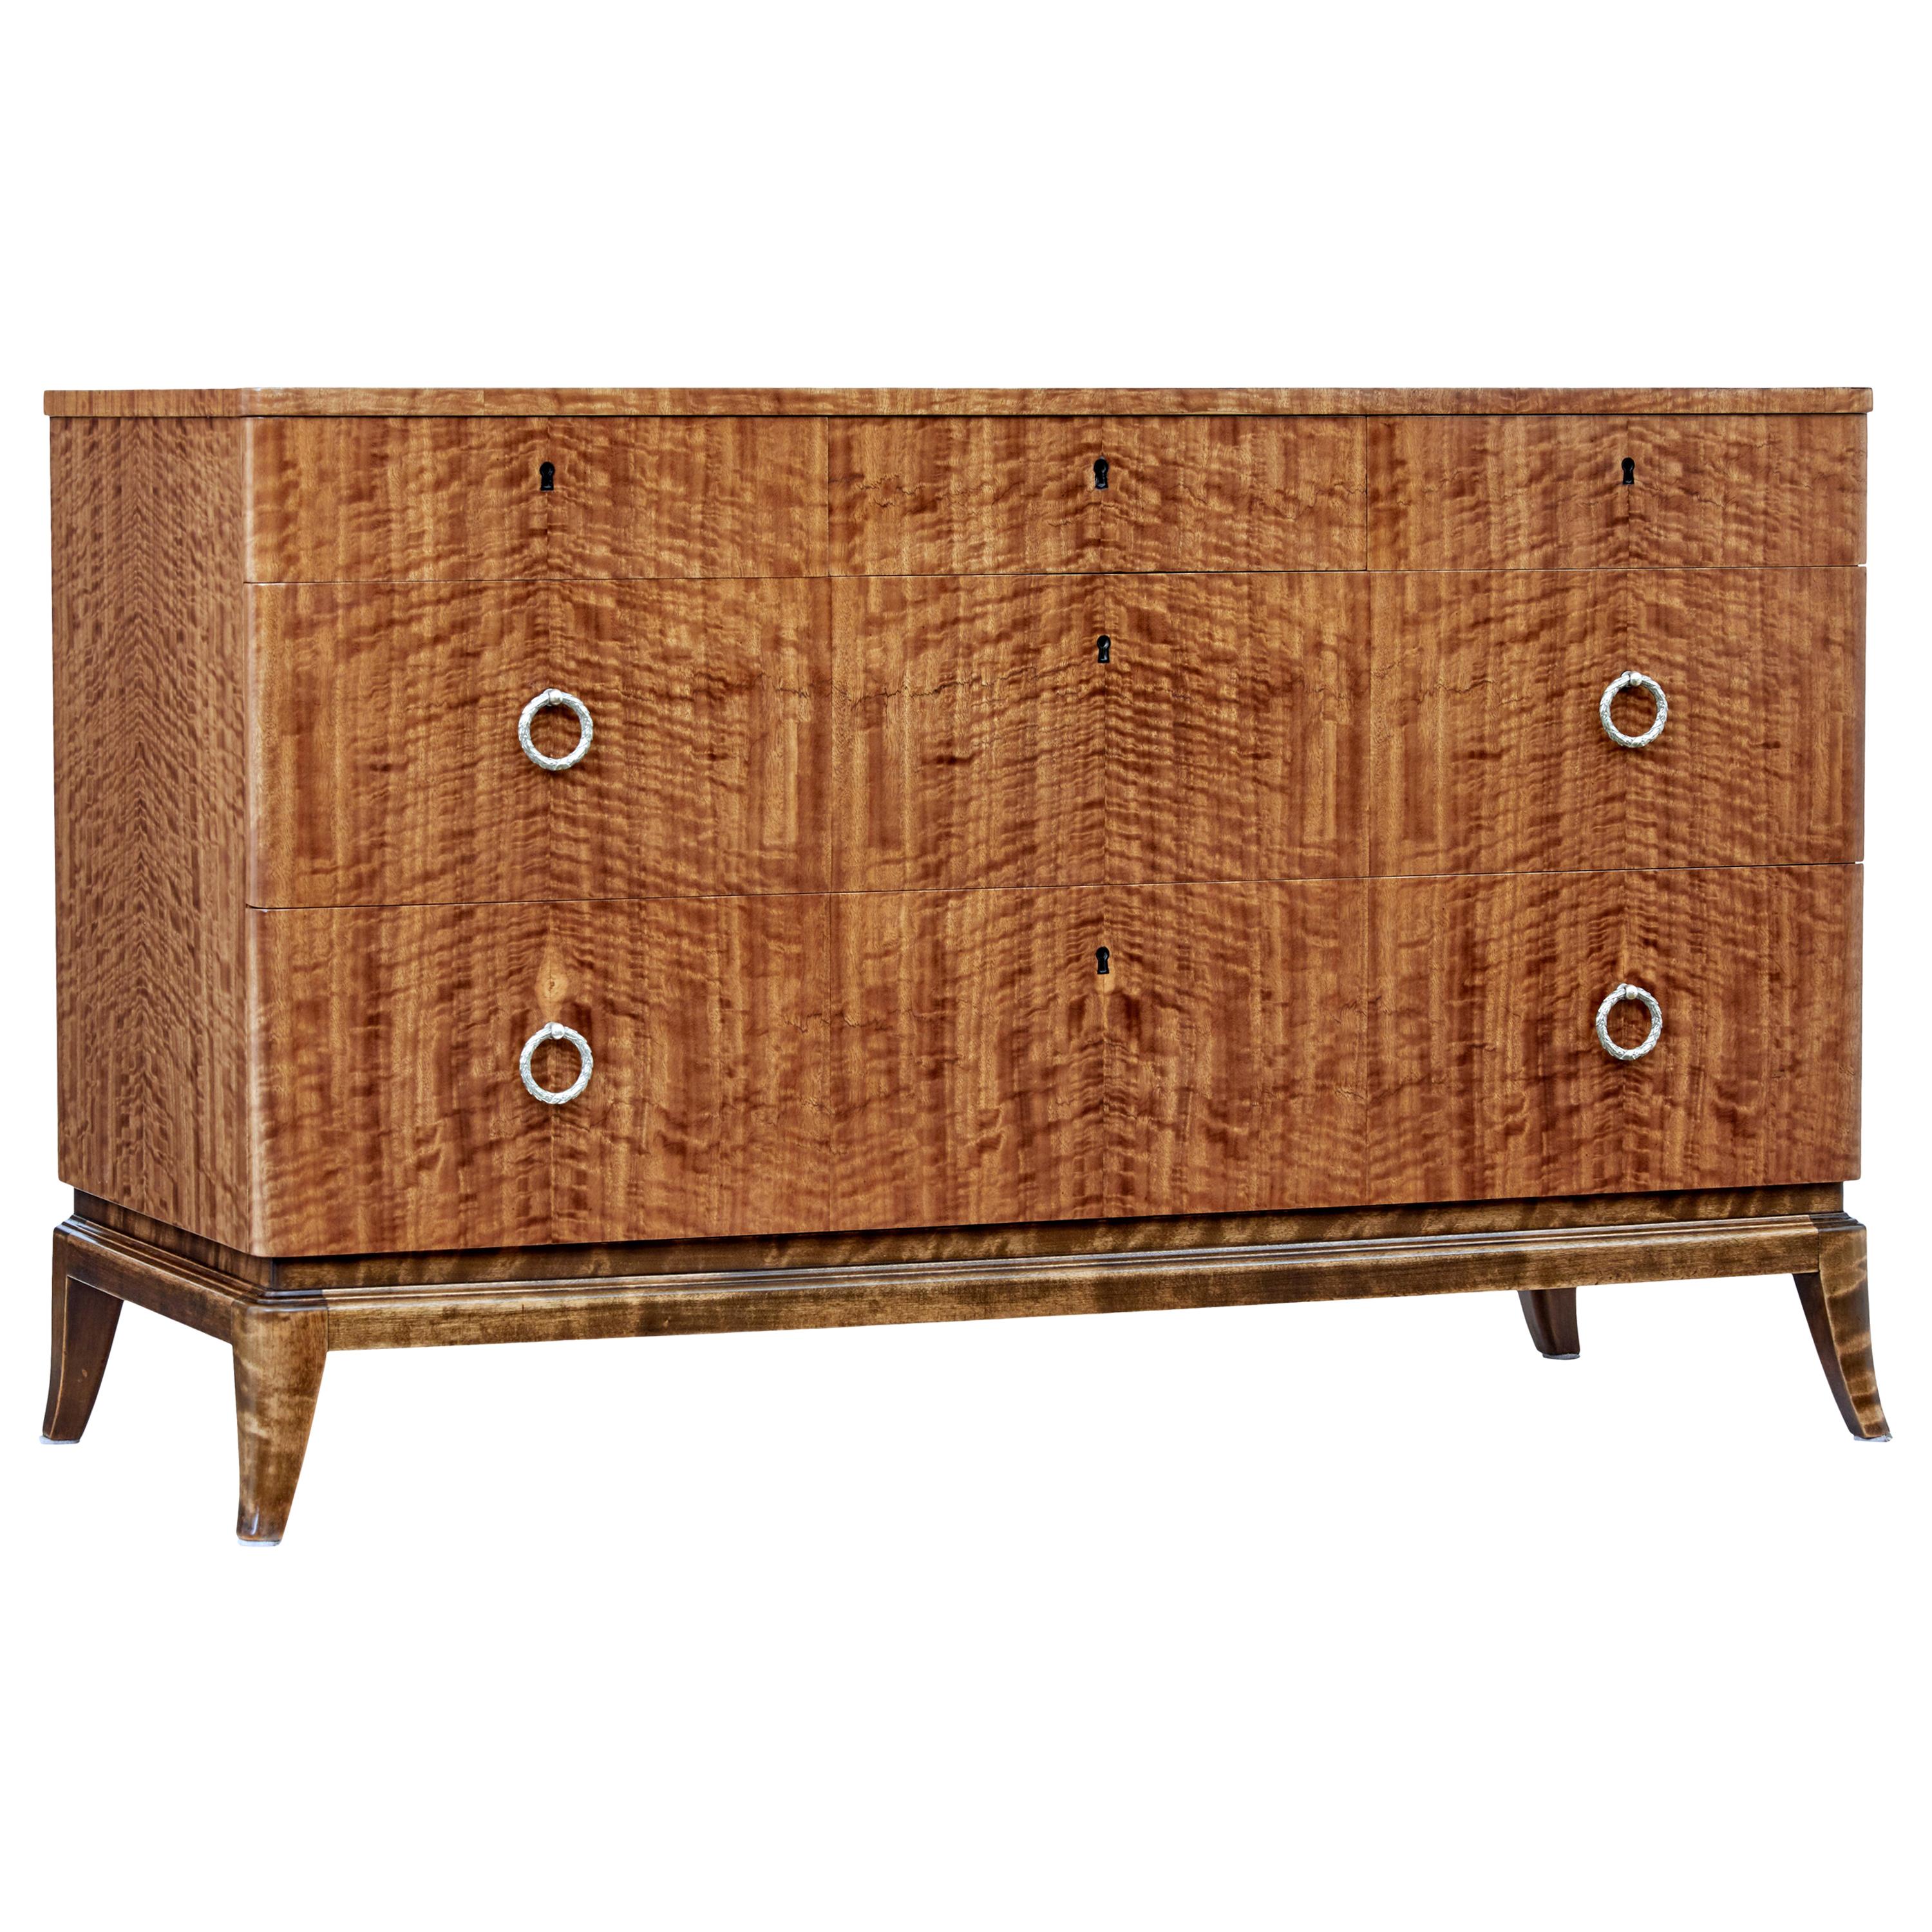 Mid-20th Century Scandinavian Satinwood Chest of Drawers